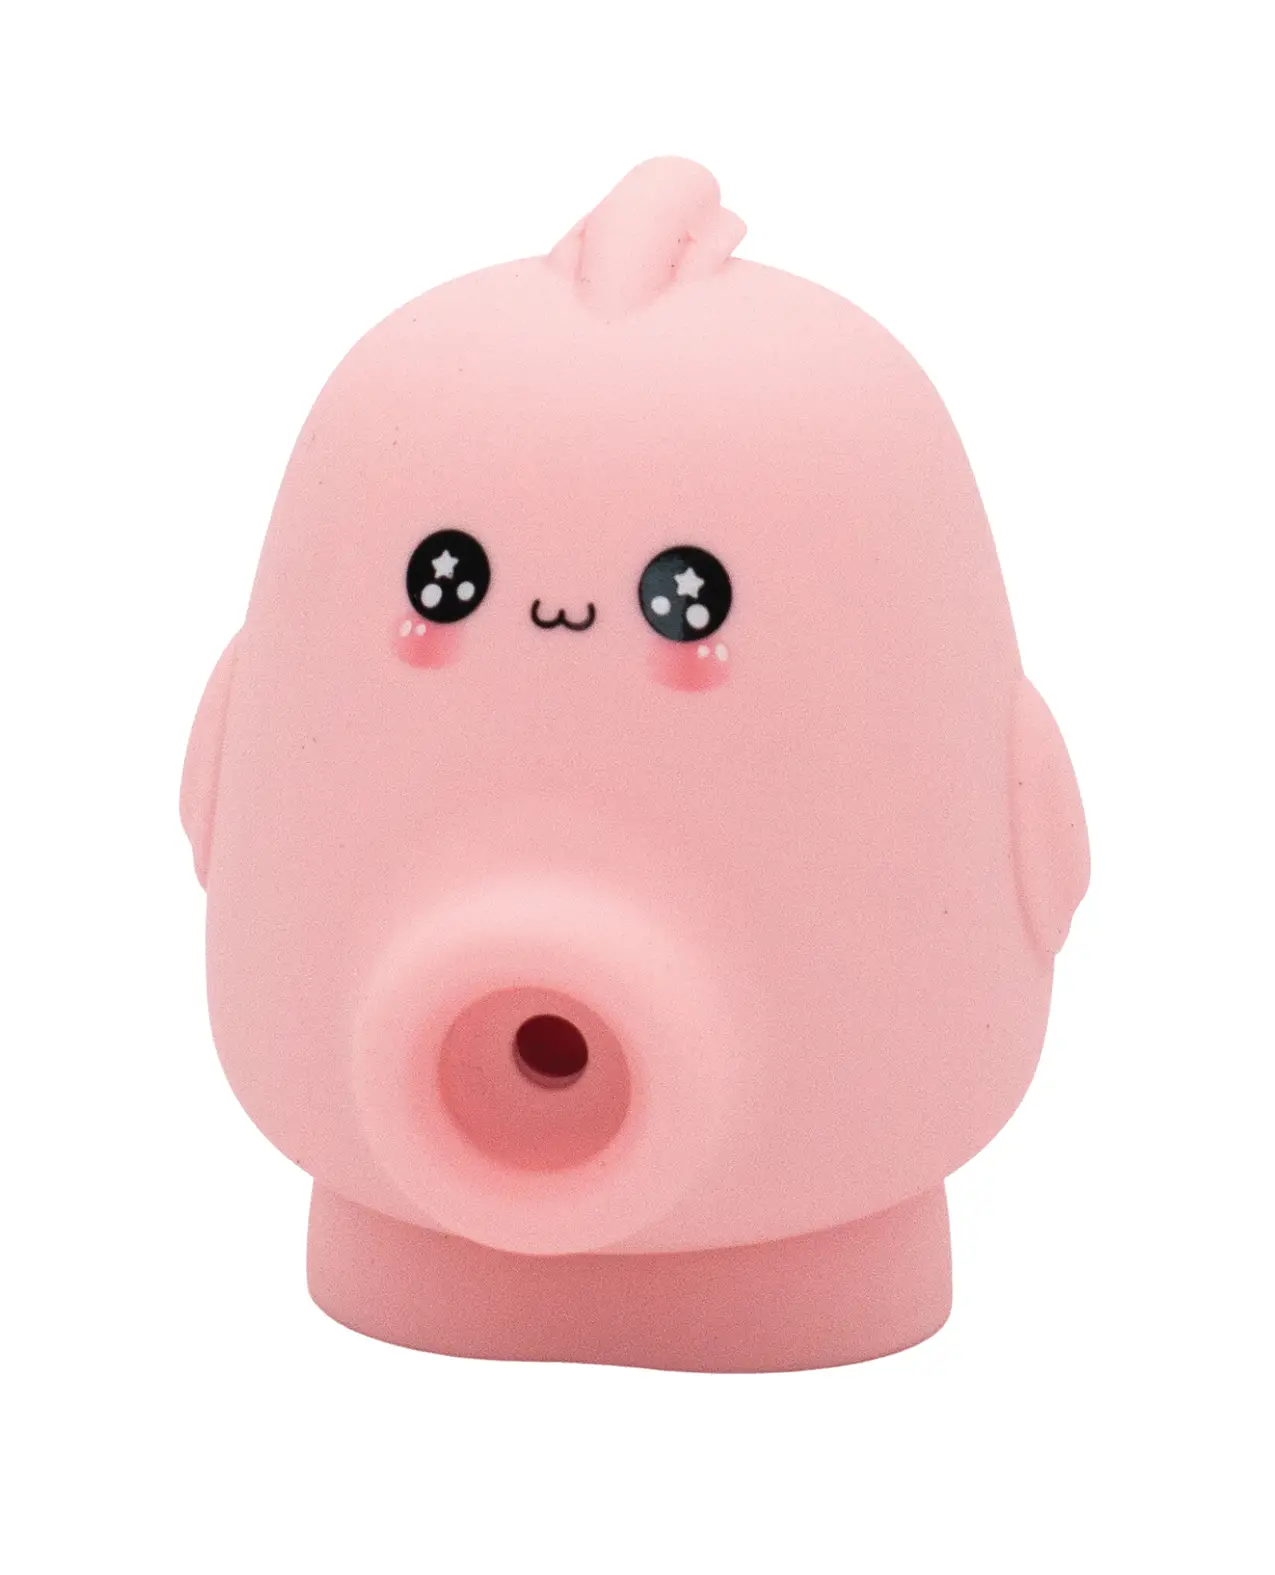 Odd Pink toy called the Kawaii Kiss Clit Flicker and Air Stimulator